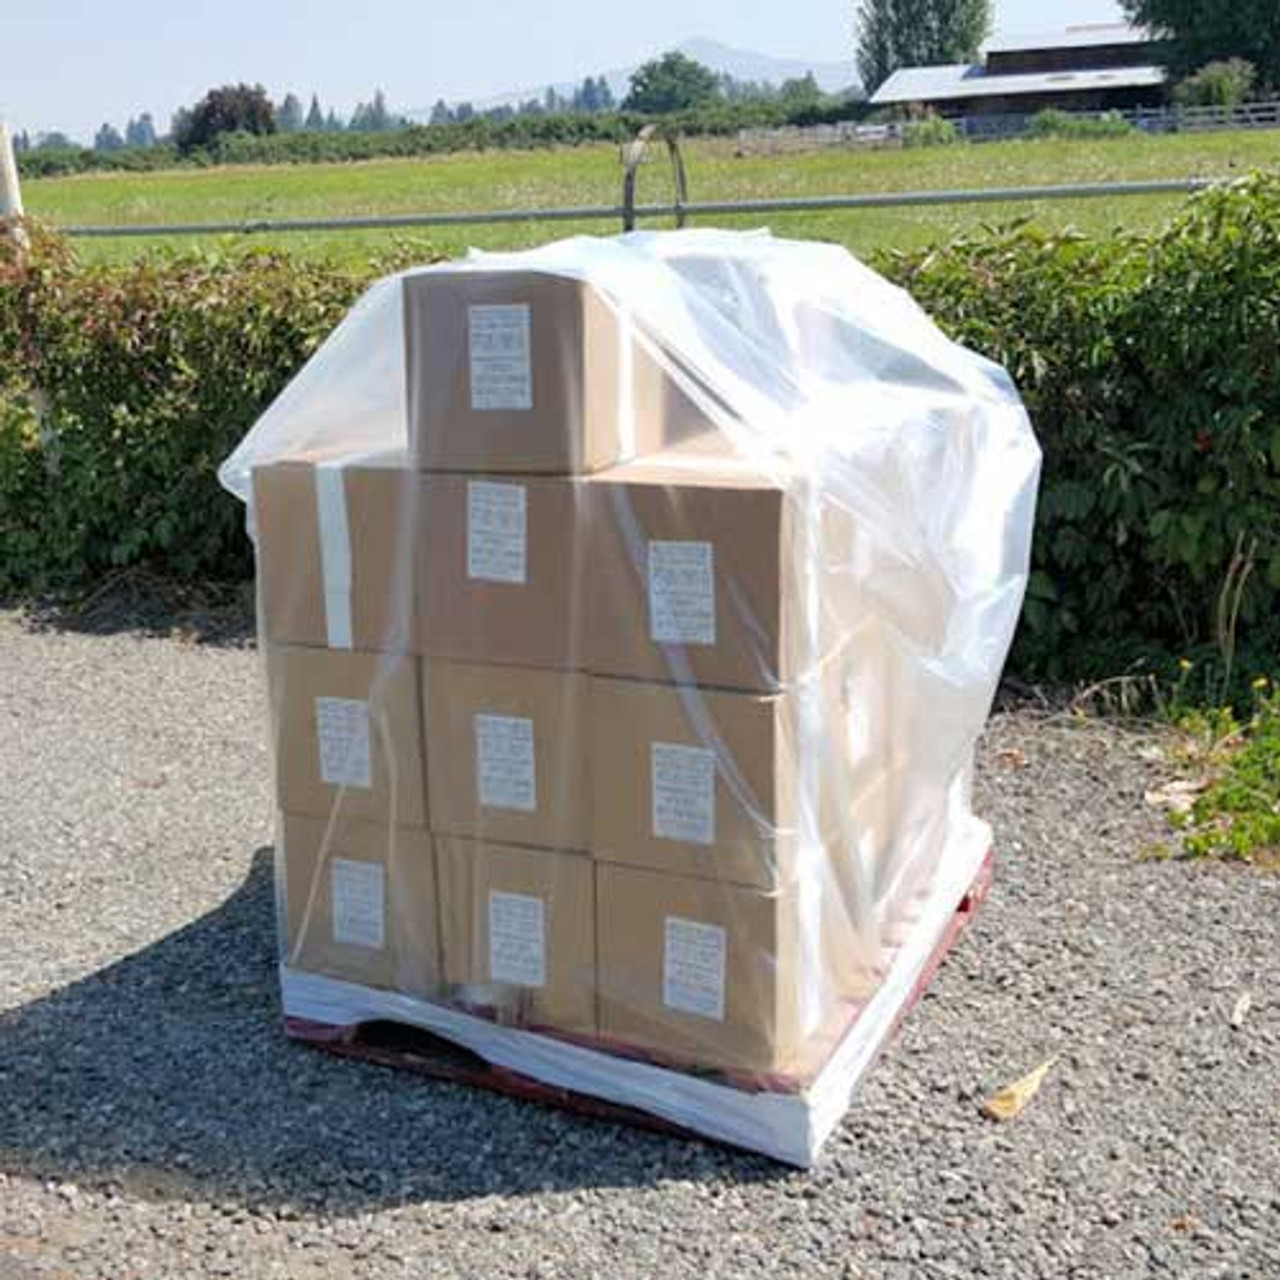 Pallet Shrink Wrap Bags & Covers